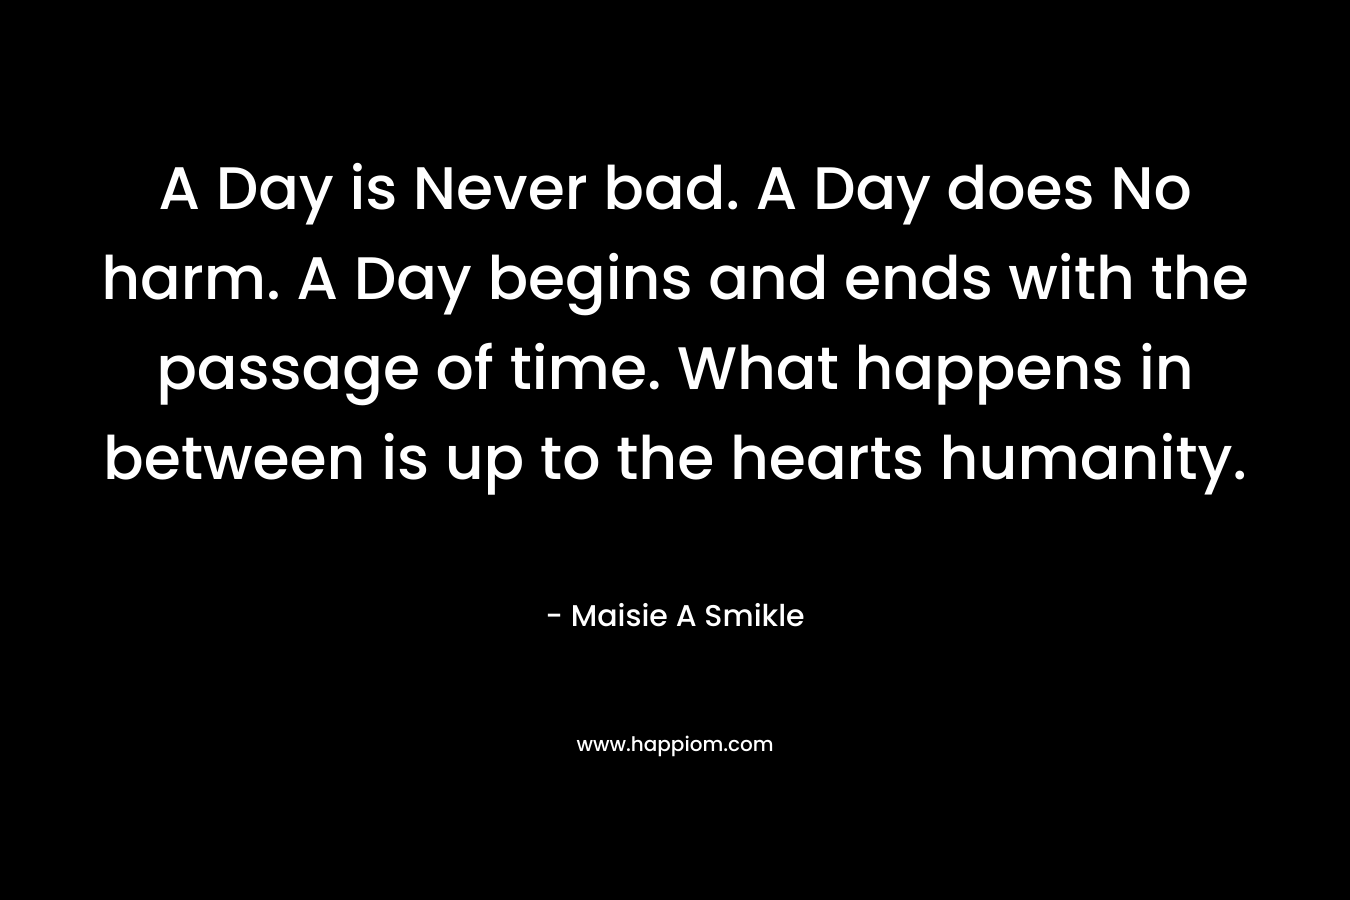 A Day is Never bad. A Day does No harm. A Day begins and ends with the passage of time. What happens in between is up to the hearts humanity.